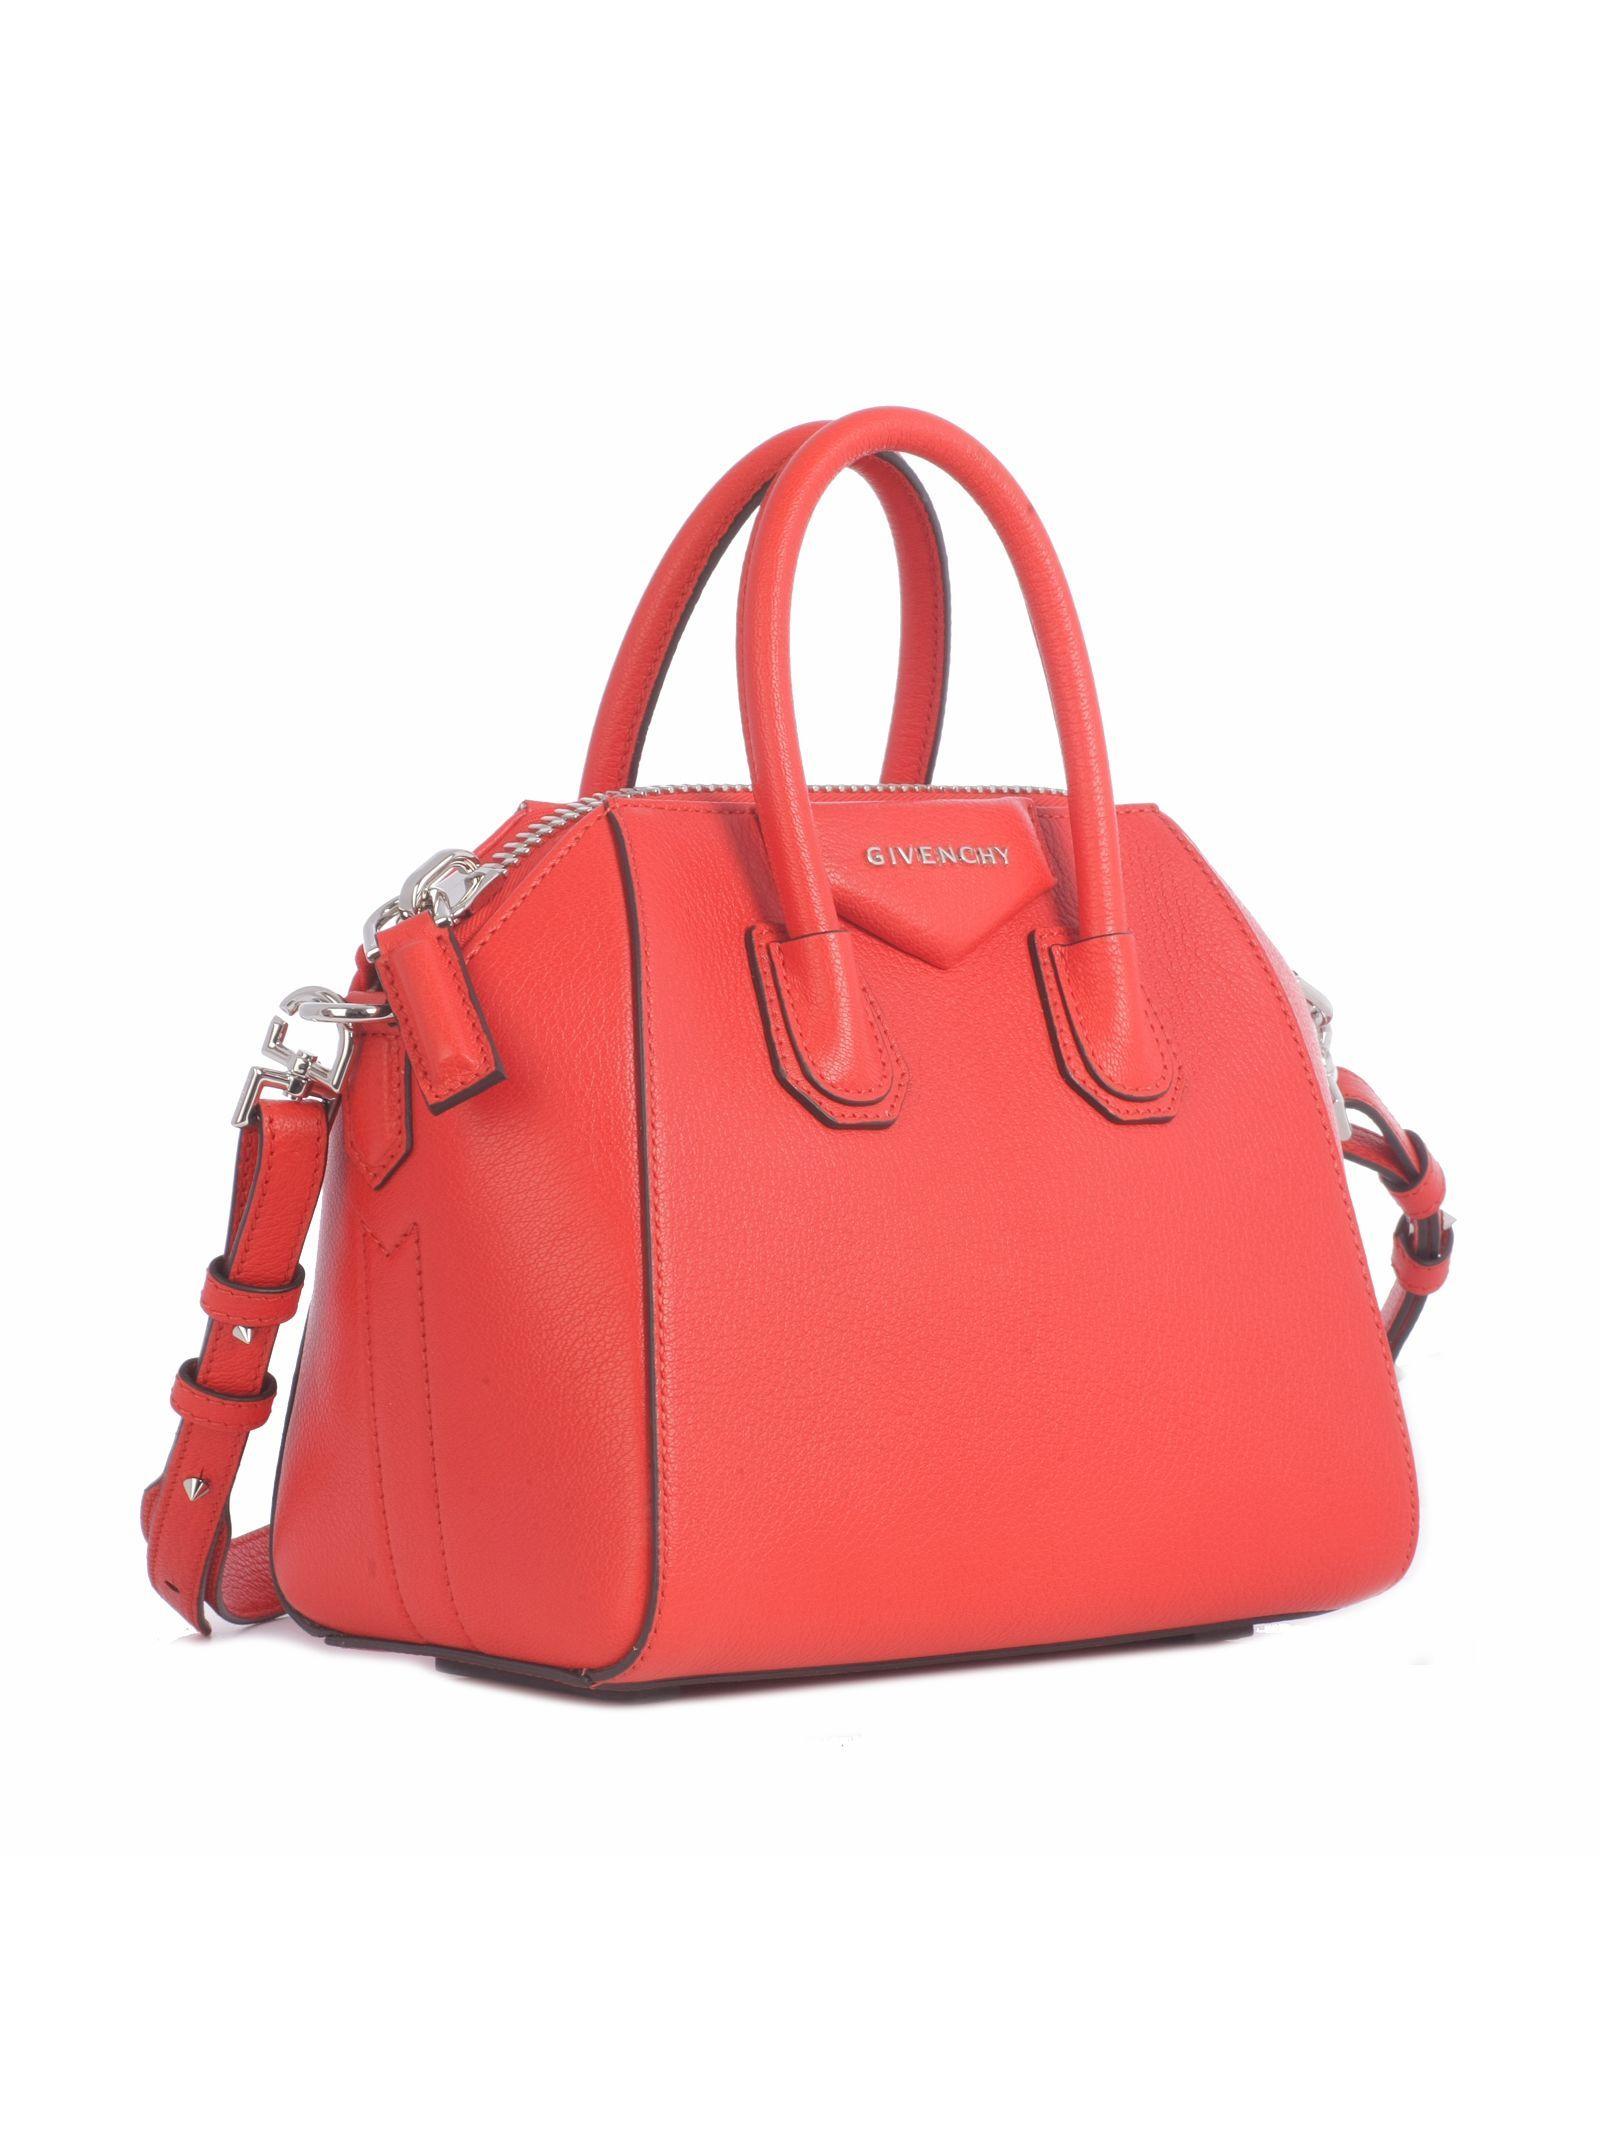 Silver On a Red Hand Logo - Givenchy Antigona Mini With Silver Insert And Silver Logo On